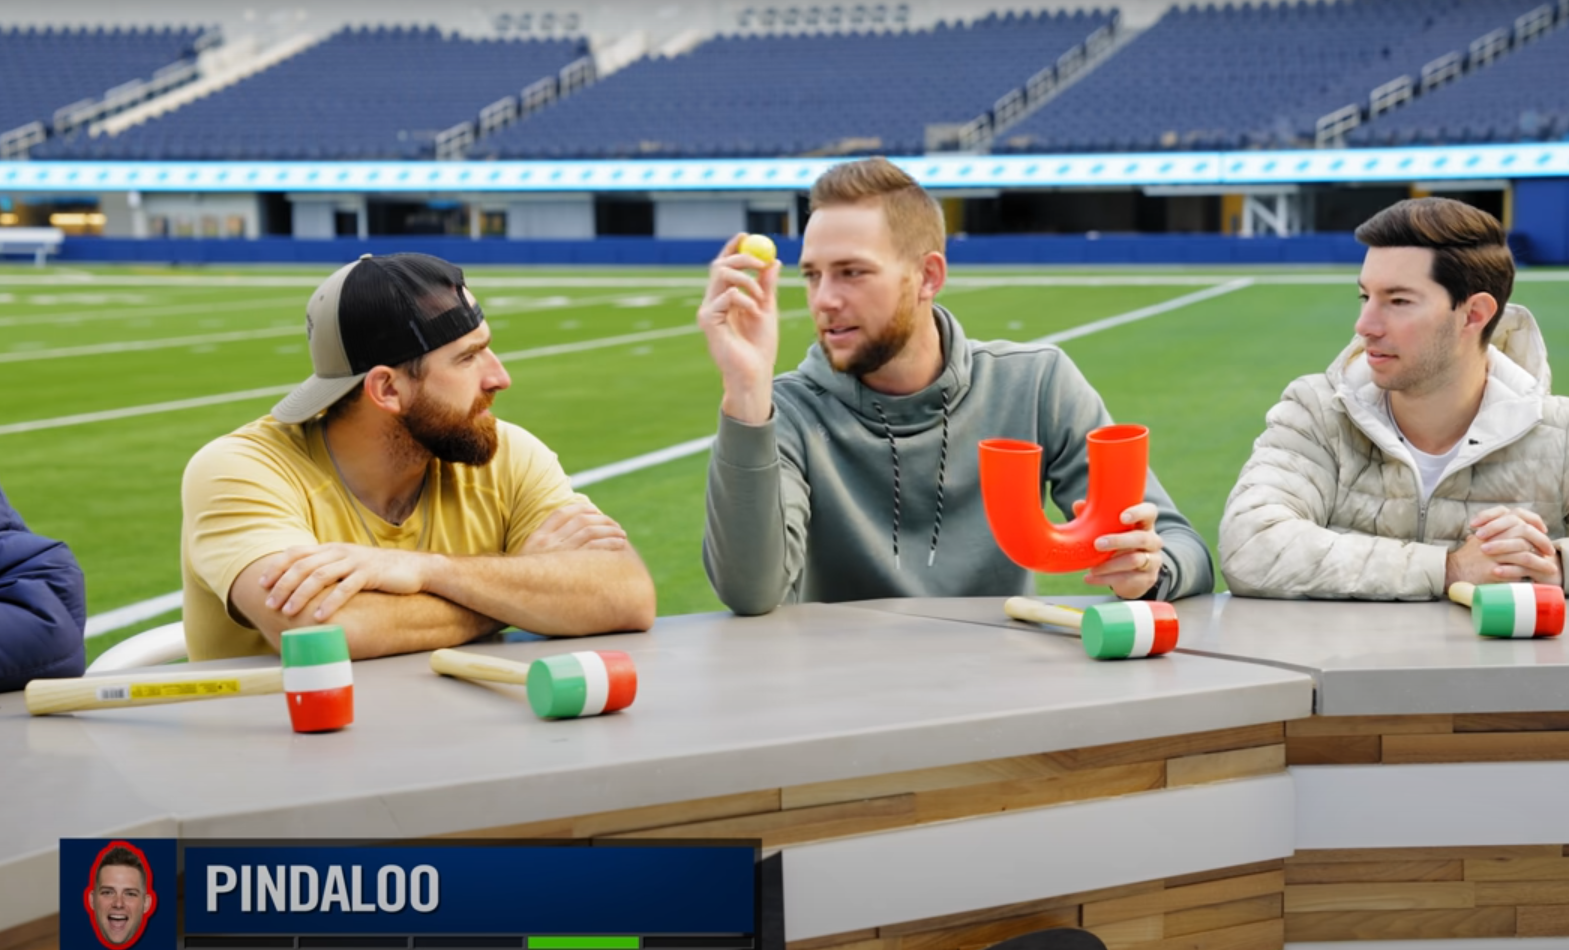 Load video: Dude perfect pindaloo test